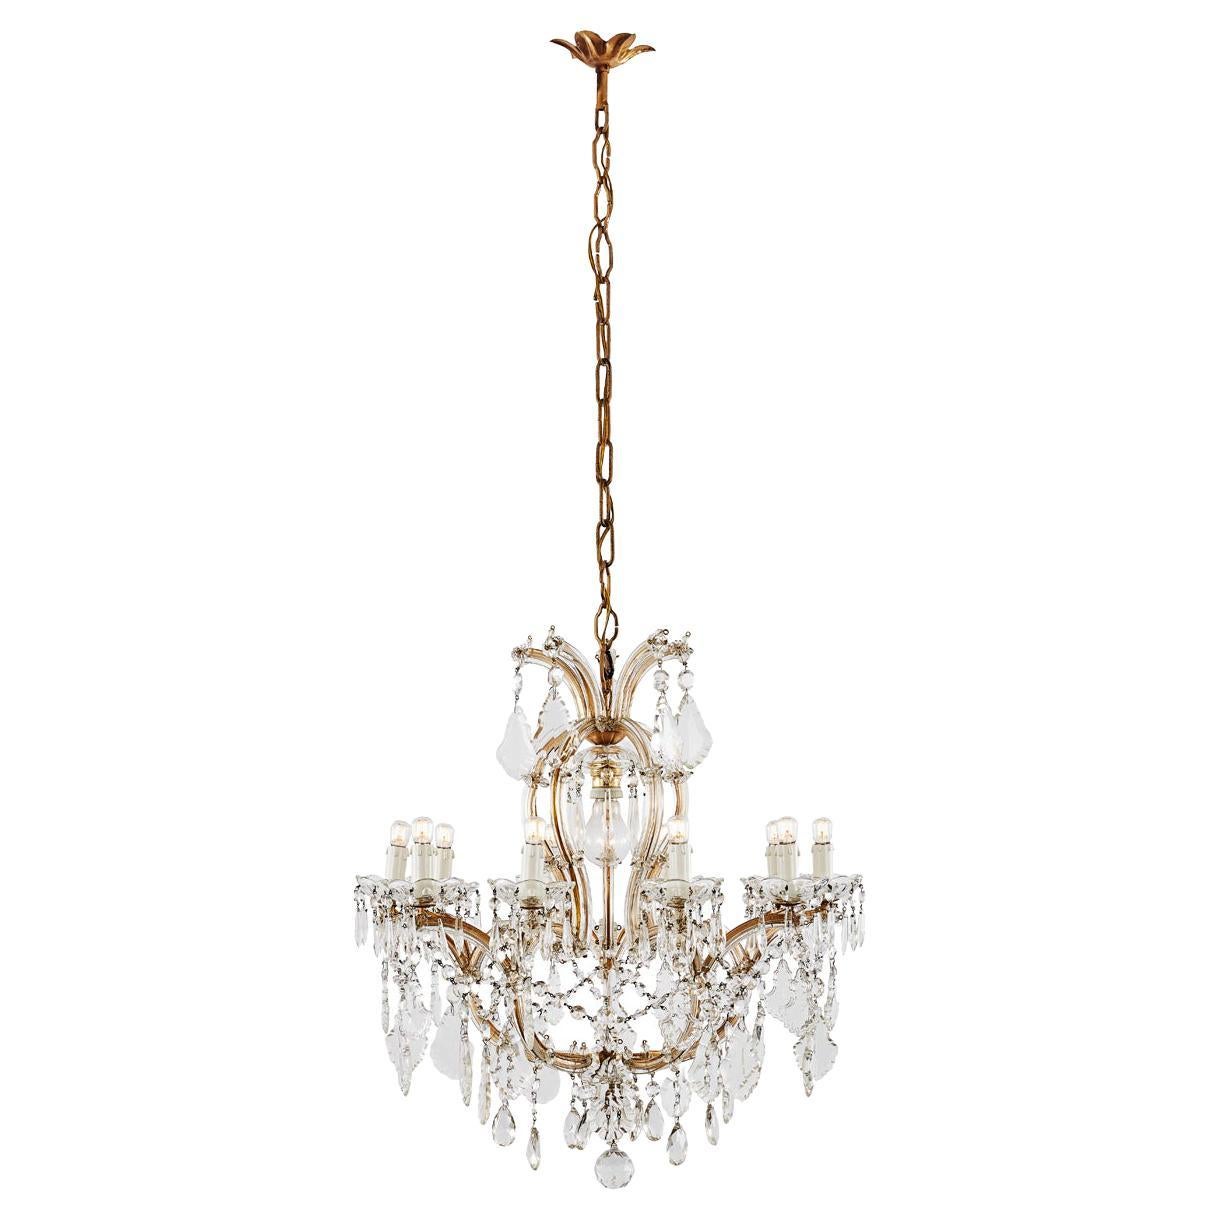 Italian Maria Theresa style ten-armed crystal chandelier dating back to 20th century. Ten arms ending with E14 light bulbs and an extra E27 bulb in the centre of the structure. This Italian vintage chandelier features a variety of faceted crystals